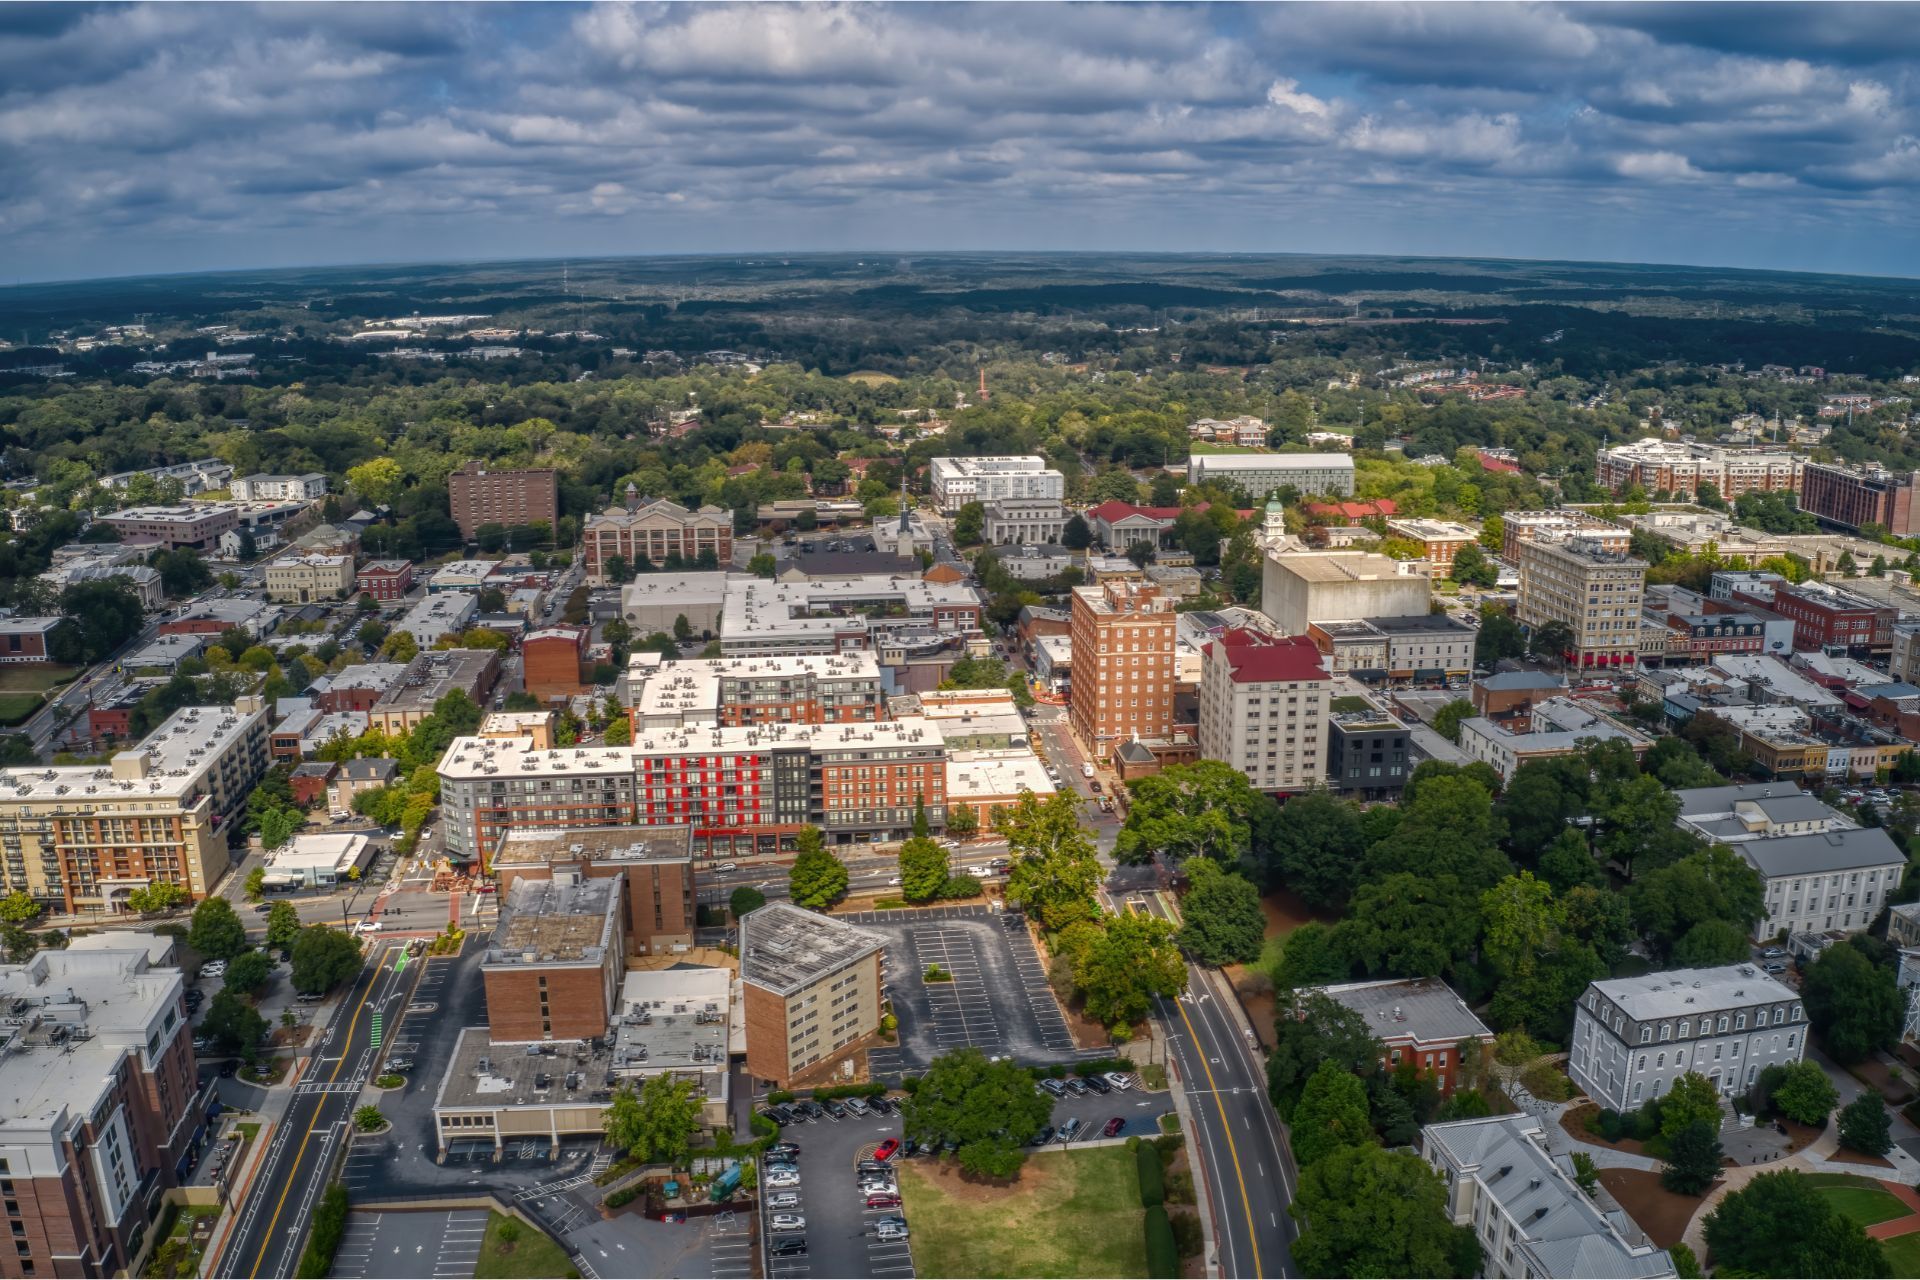 Overhead view of Athens, GA with buildings and greenery.